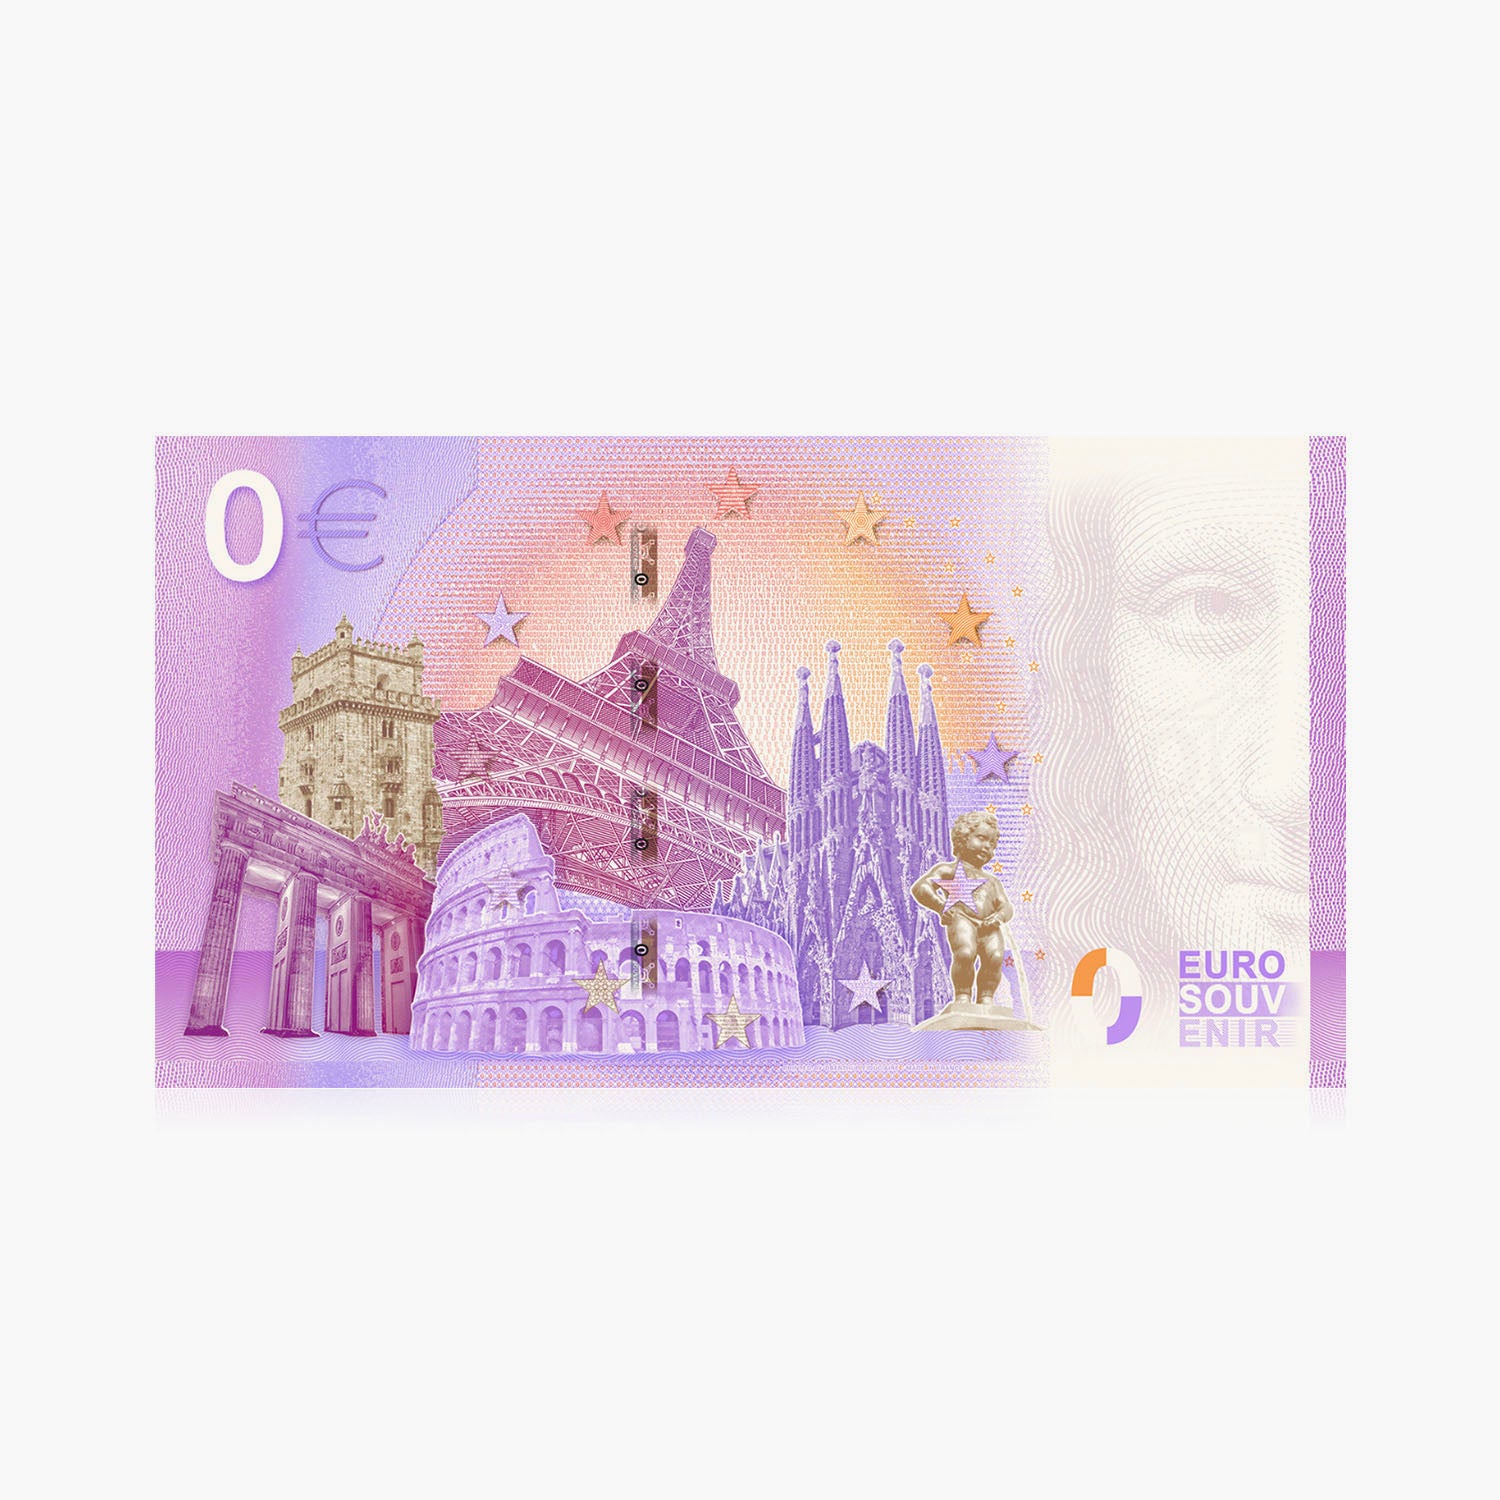 The Disney 100th Anniversary Scrooge McDuck 0 Euro Banknote